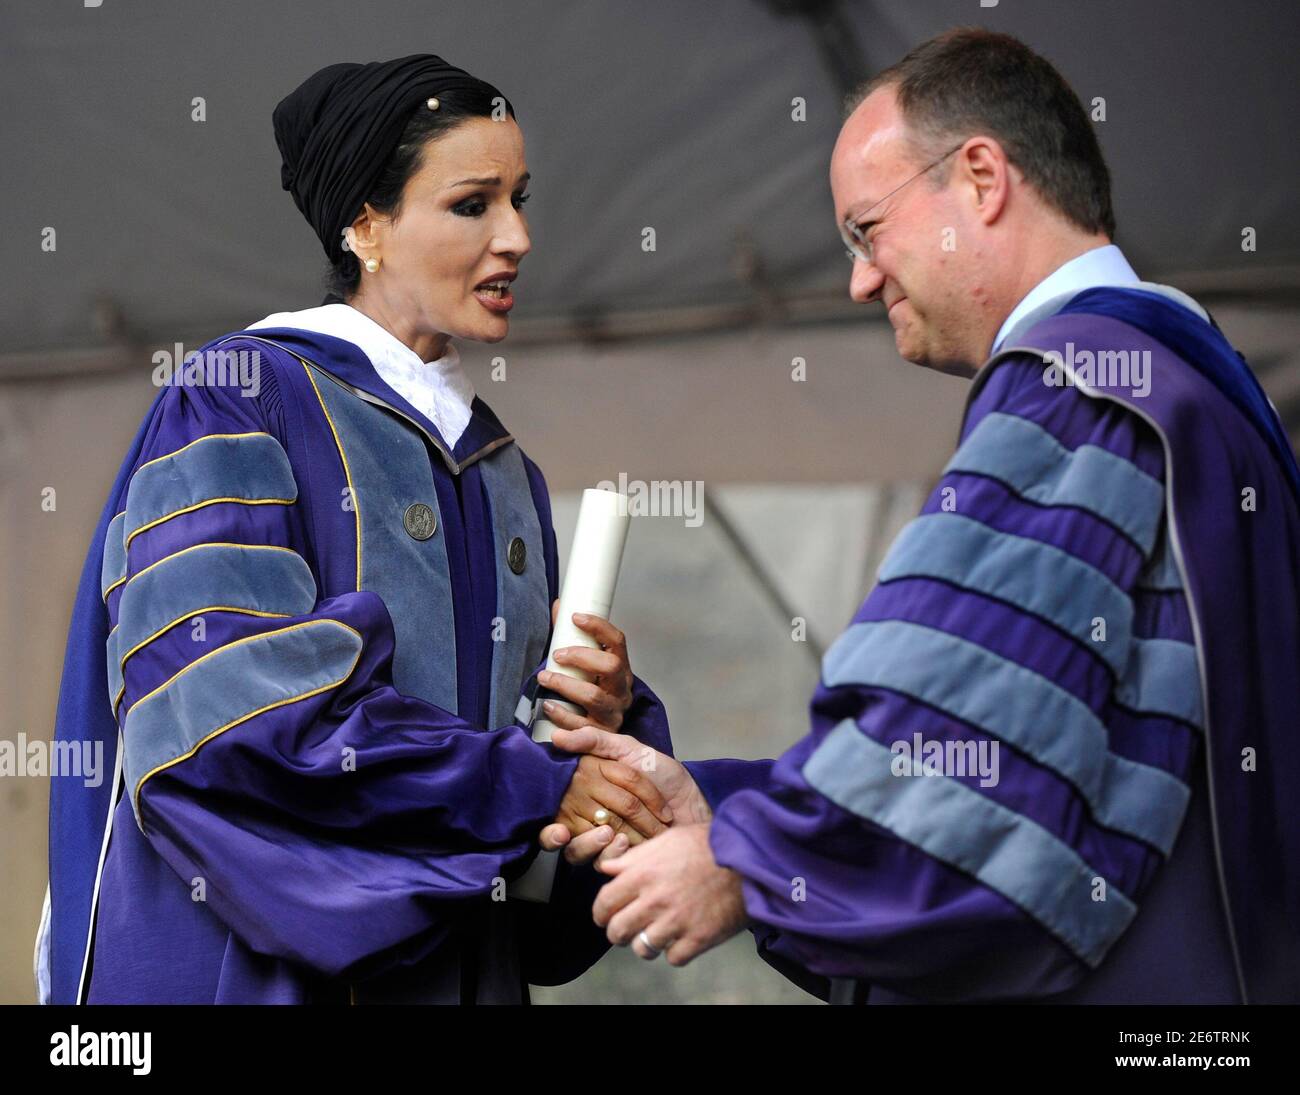 Qatar's first lady Sheikha Mozah bint Nasser Al Missned (L) holds her honorary degree as she shakes hands with Georgetown University President John DeGioia at Georgetown University's commencement exercises in Washington, May 17, 2008. Her Highness addressed the event with the theme 'The Practice of Knowledge', challenging the graduates to use their skills and insights to bring about positive change in the world.   REUTERS/Mike Theiler (UNITED STATES) Stock Photo